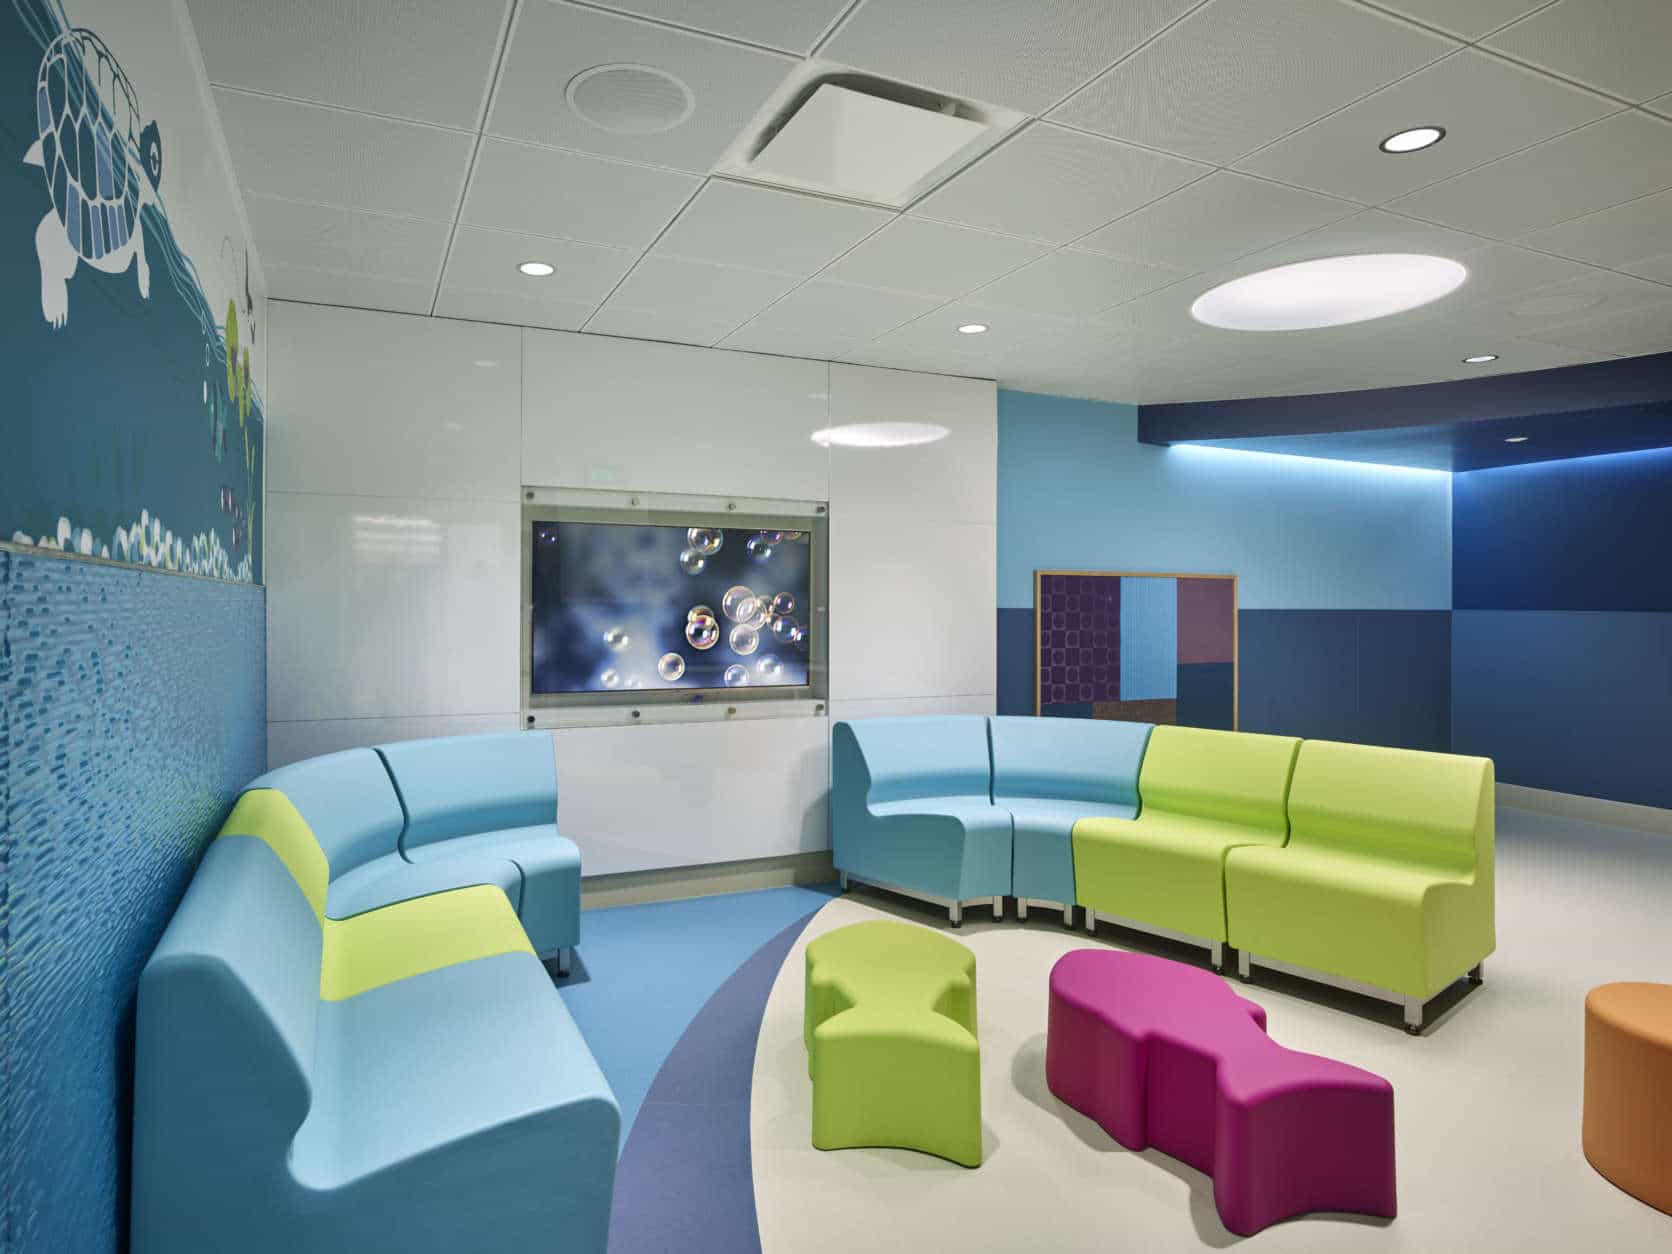 While the psychiatry unit has been physically updated, so has its approach to children's mental health, said Beers. She said it's about identifying and treating mental health issues earlier and making sure families handle childrens' mental health just as they would their physical health care.  (Courtesy Children's National Medical Center)
